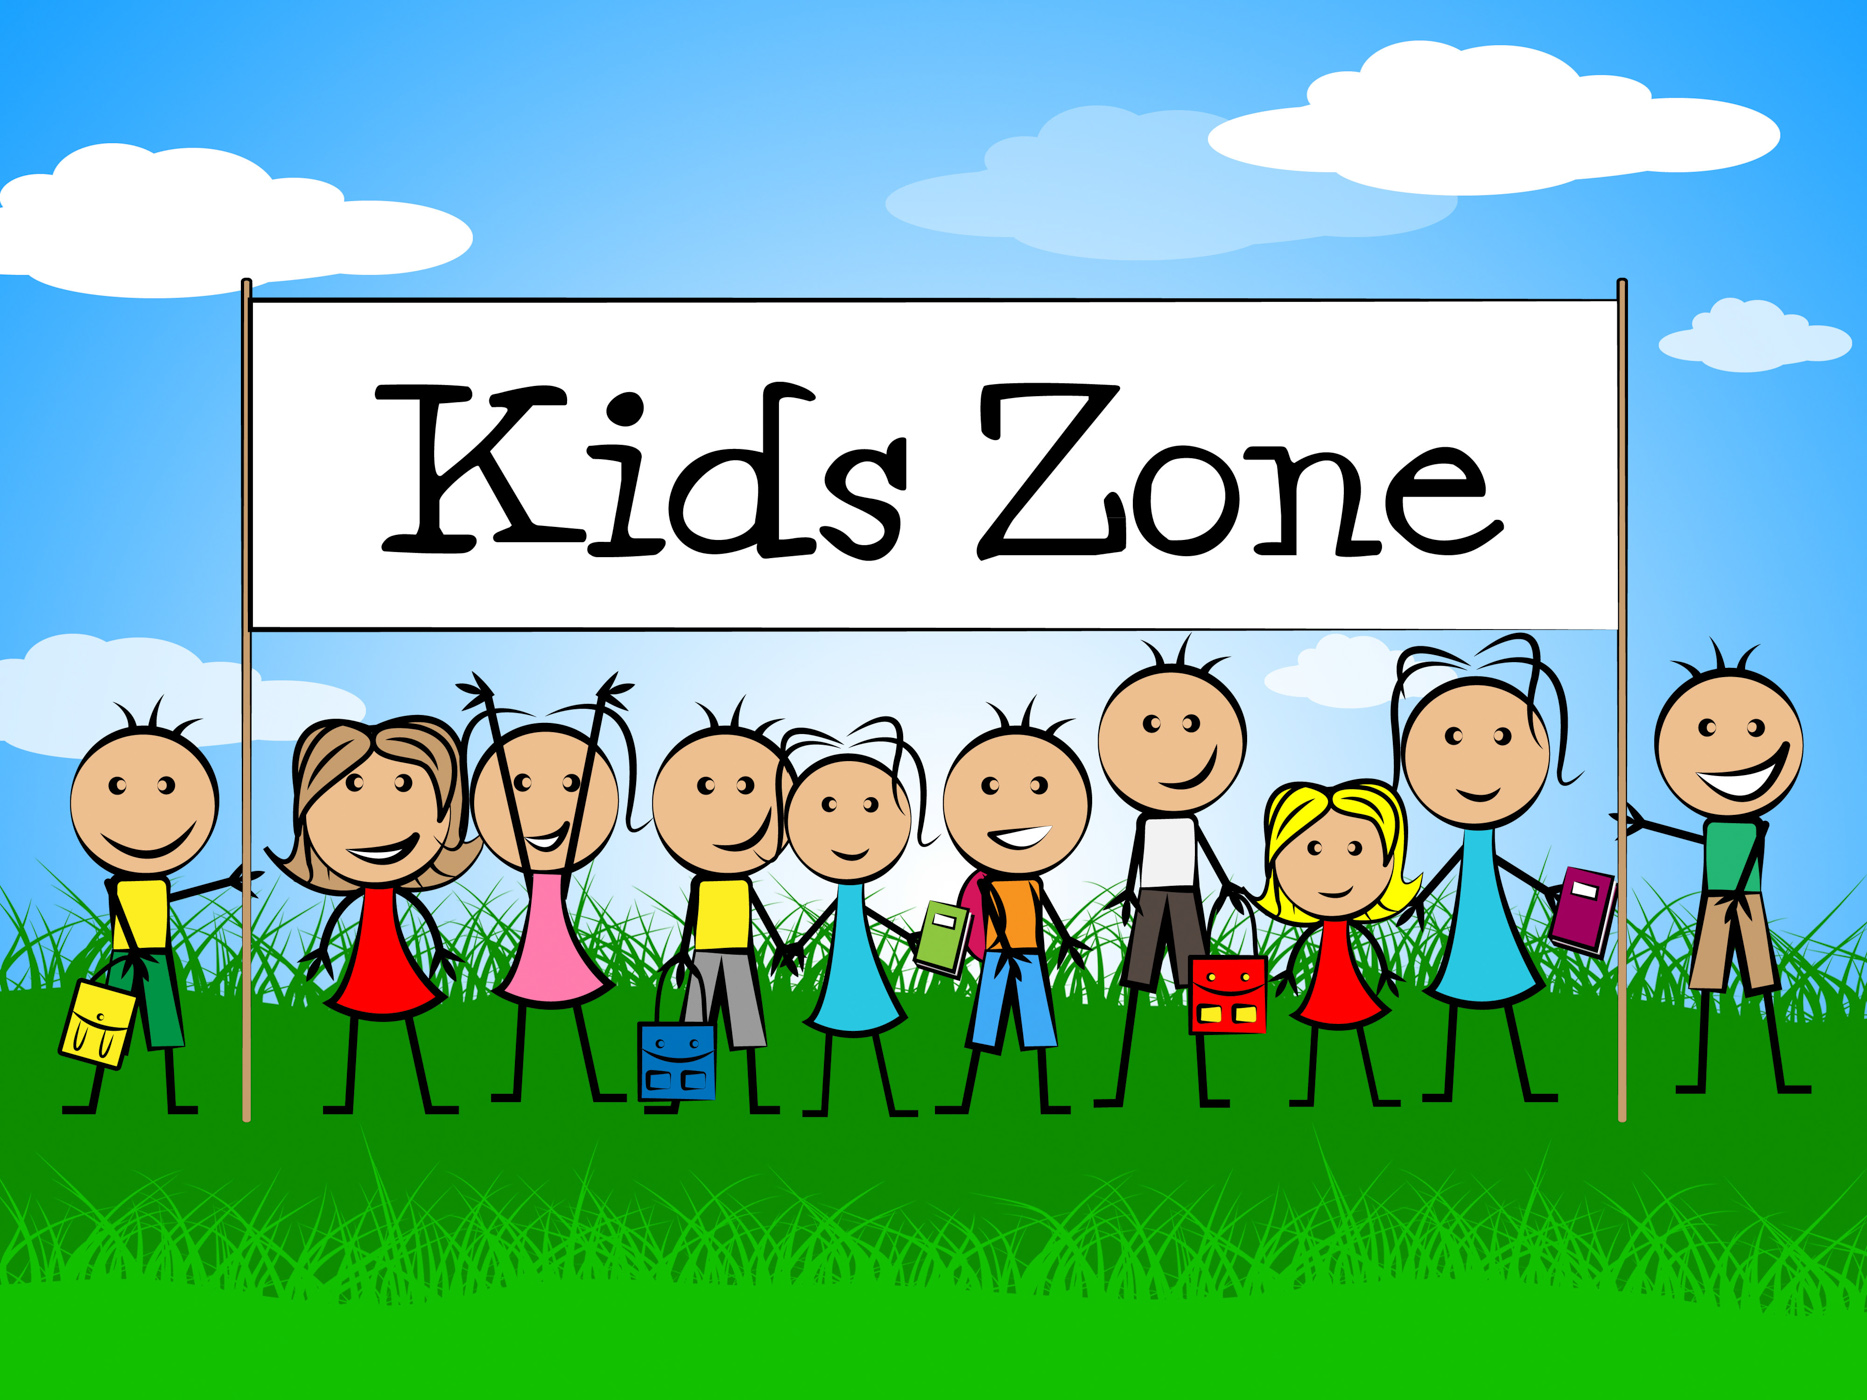 Kids zone banner indicates playing playtime and youngster photo